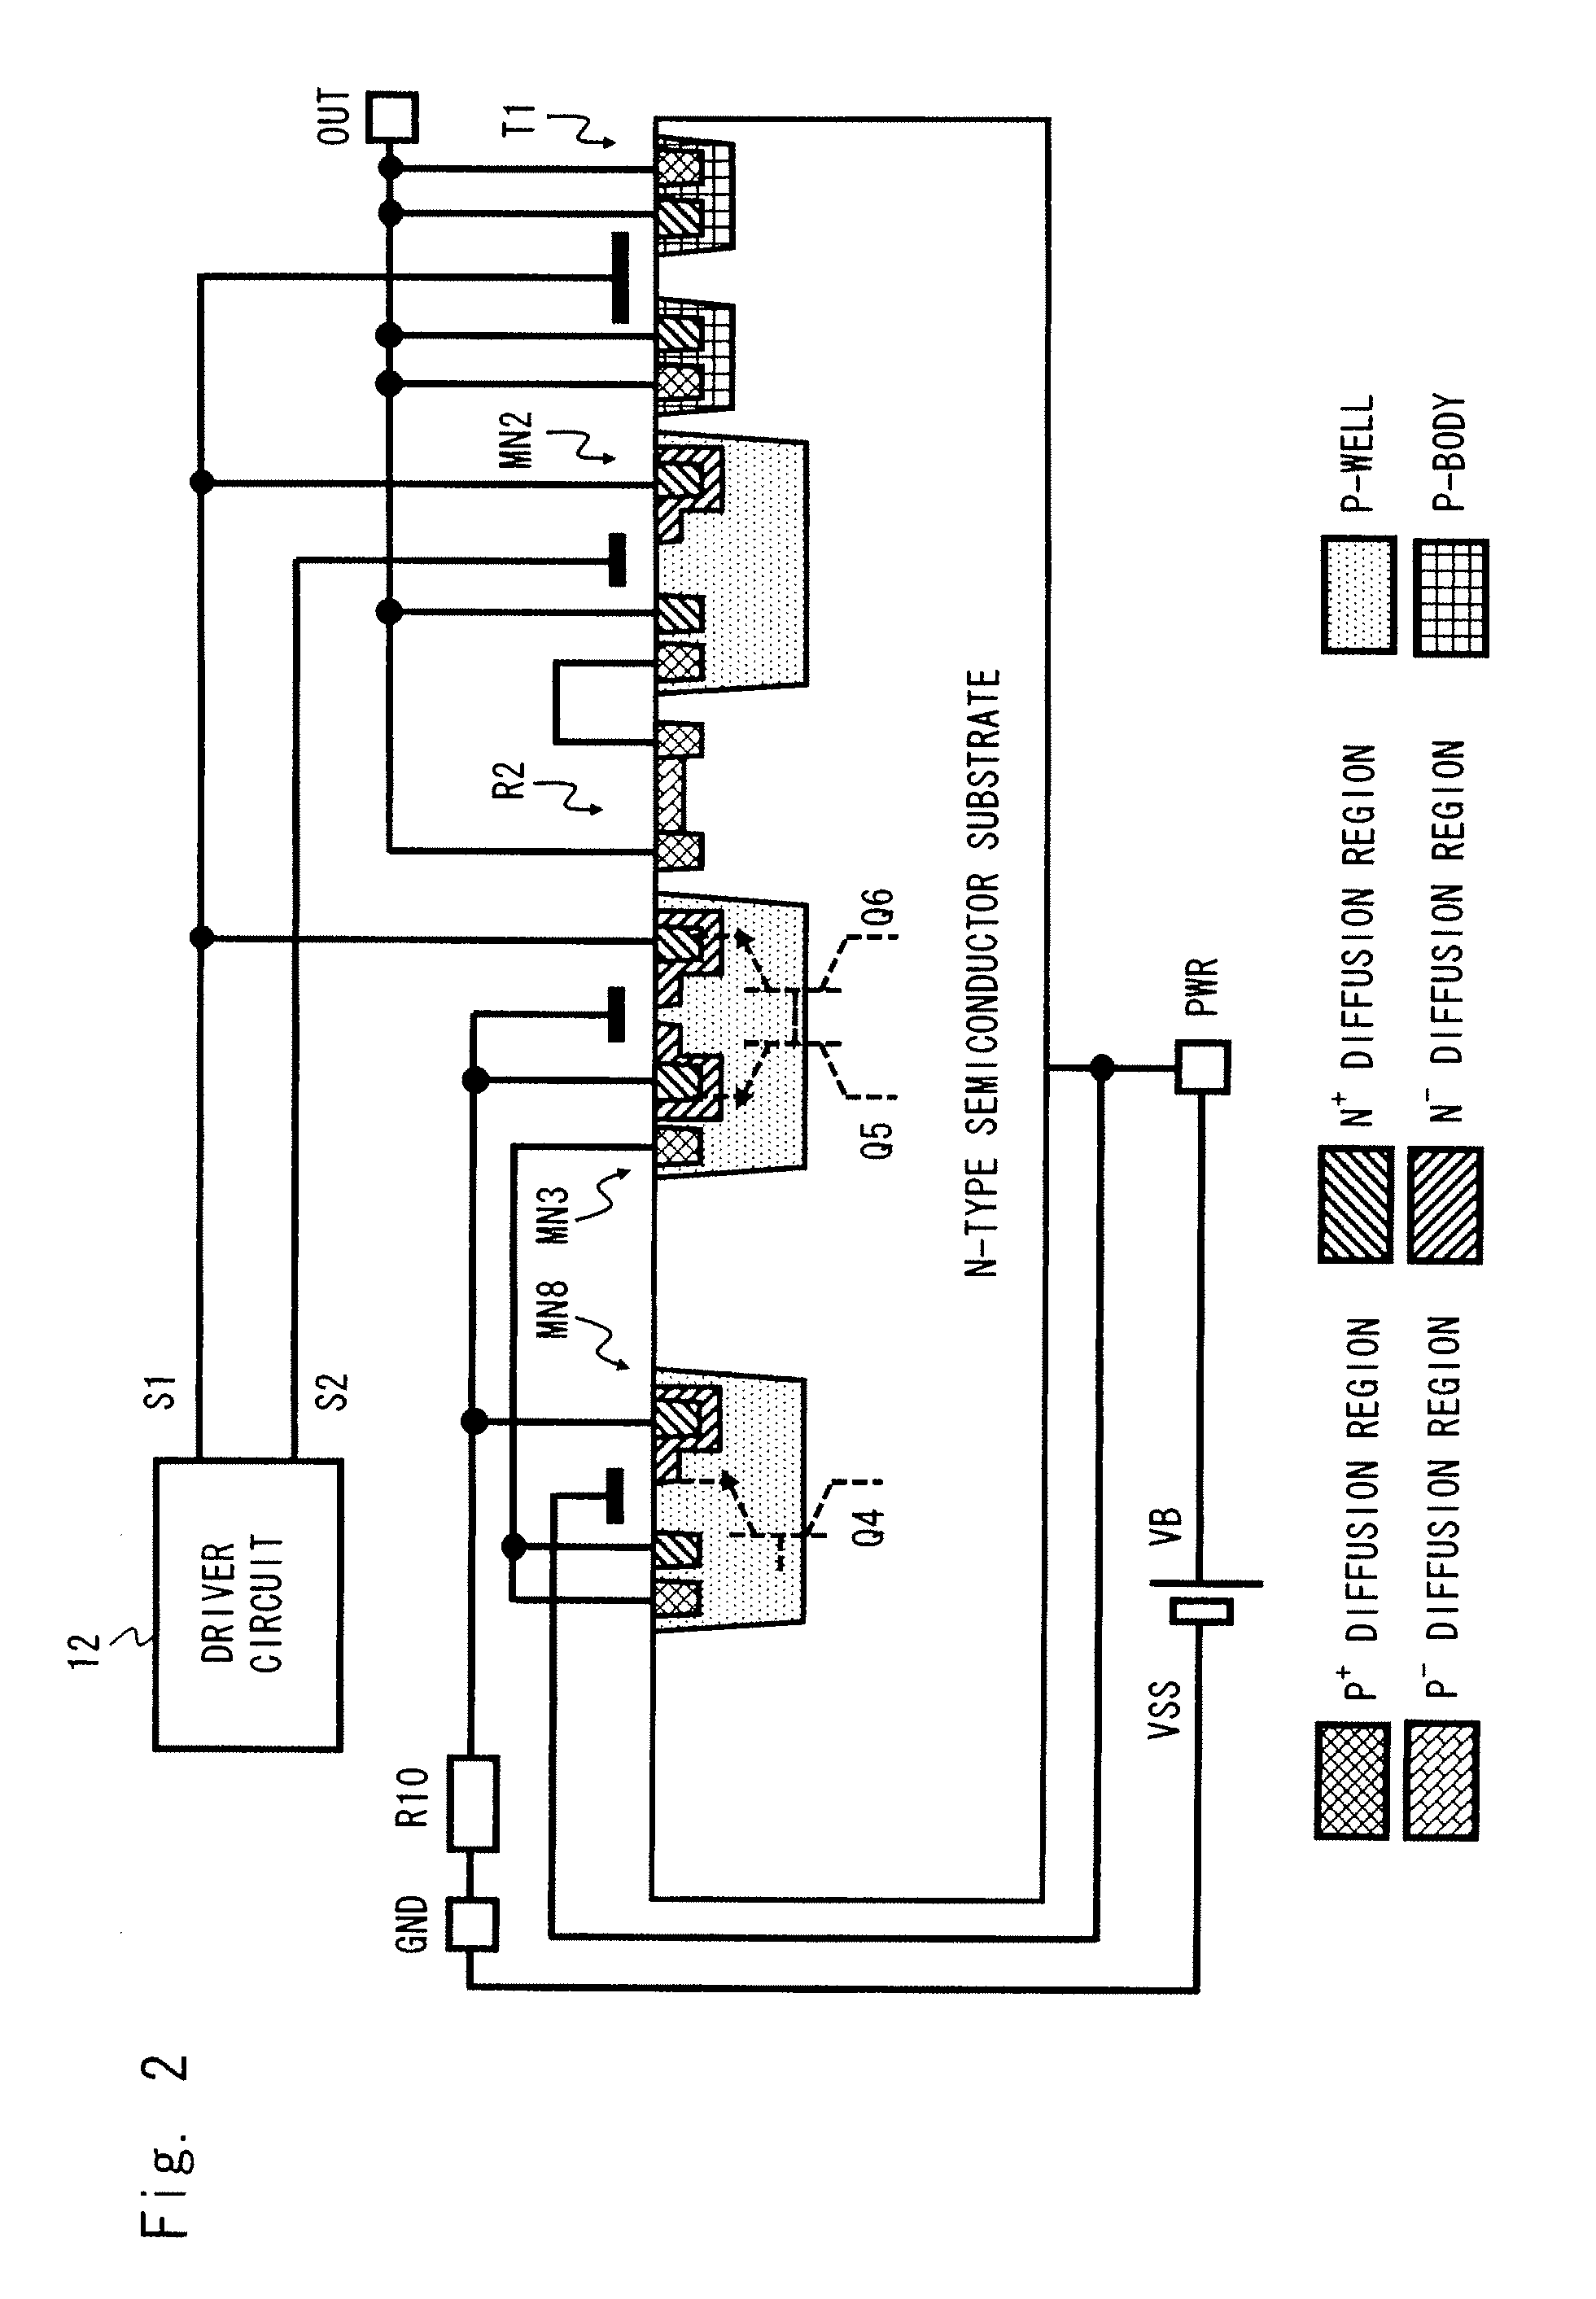 Load driving device